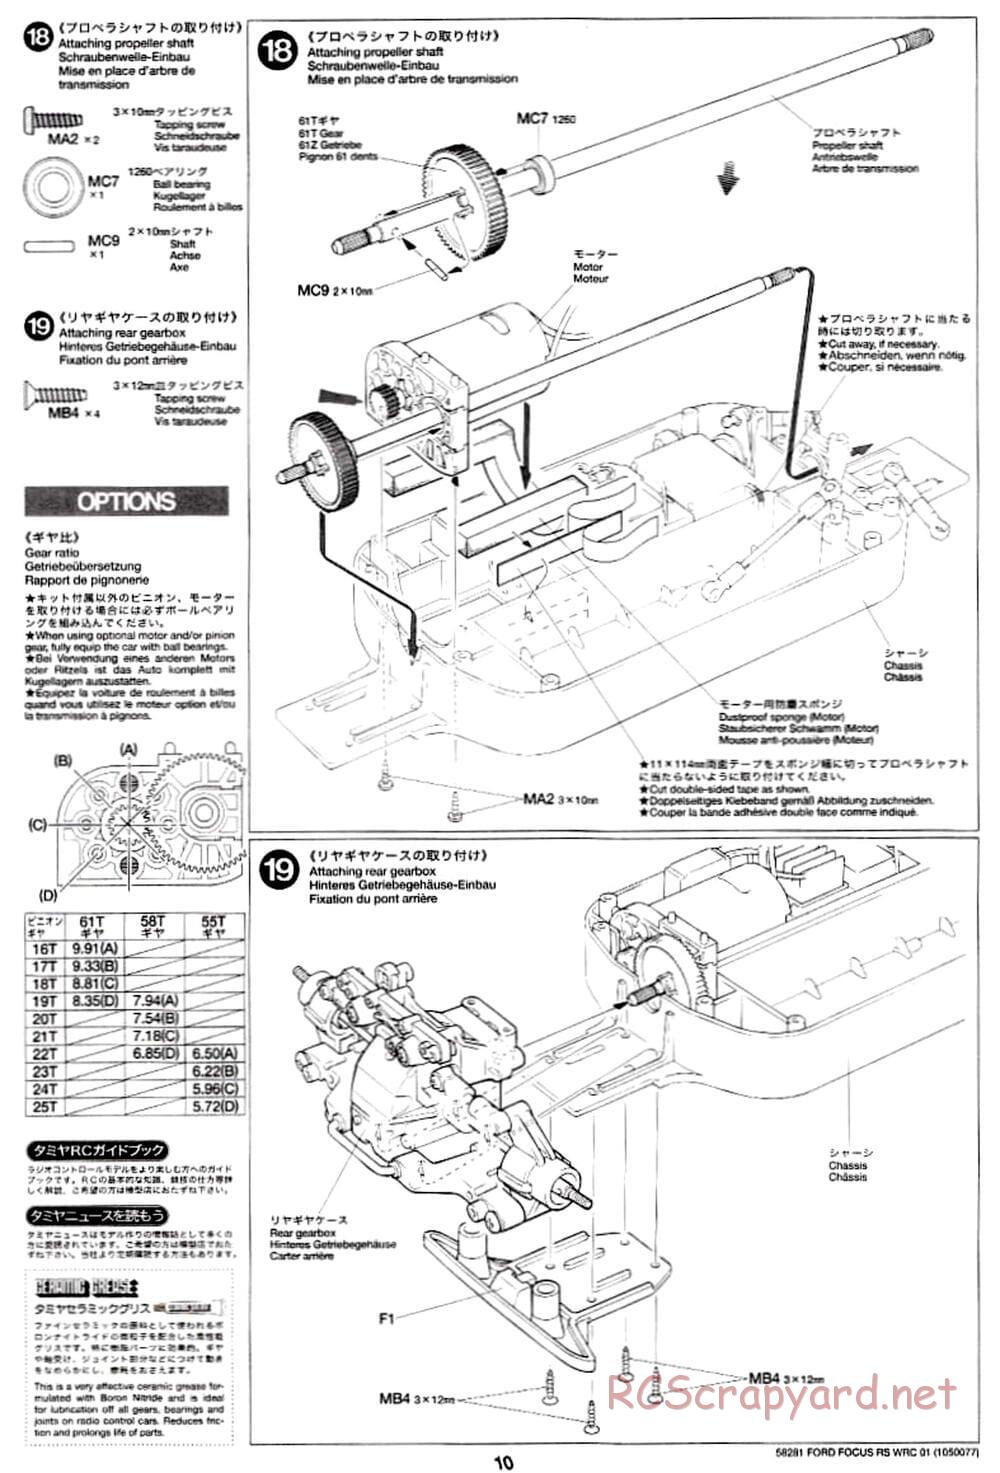 Tamiya - Ford Focus RS WRC 01 - TB-01 Chassis - Manual - Page 10